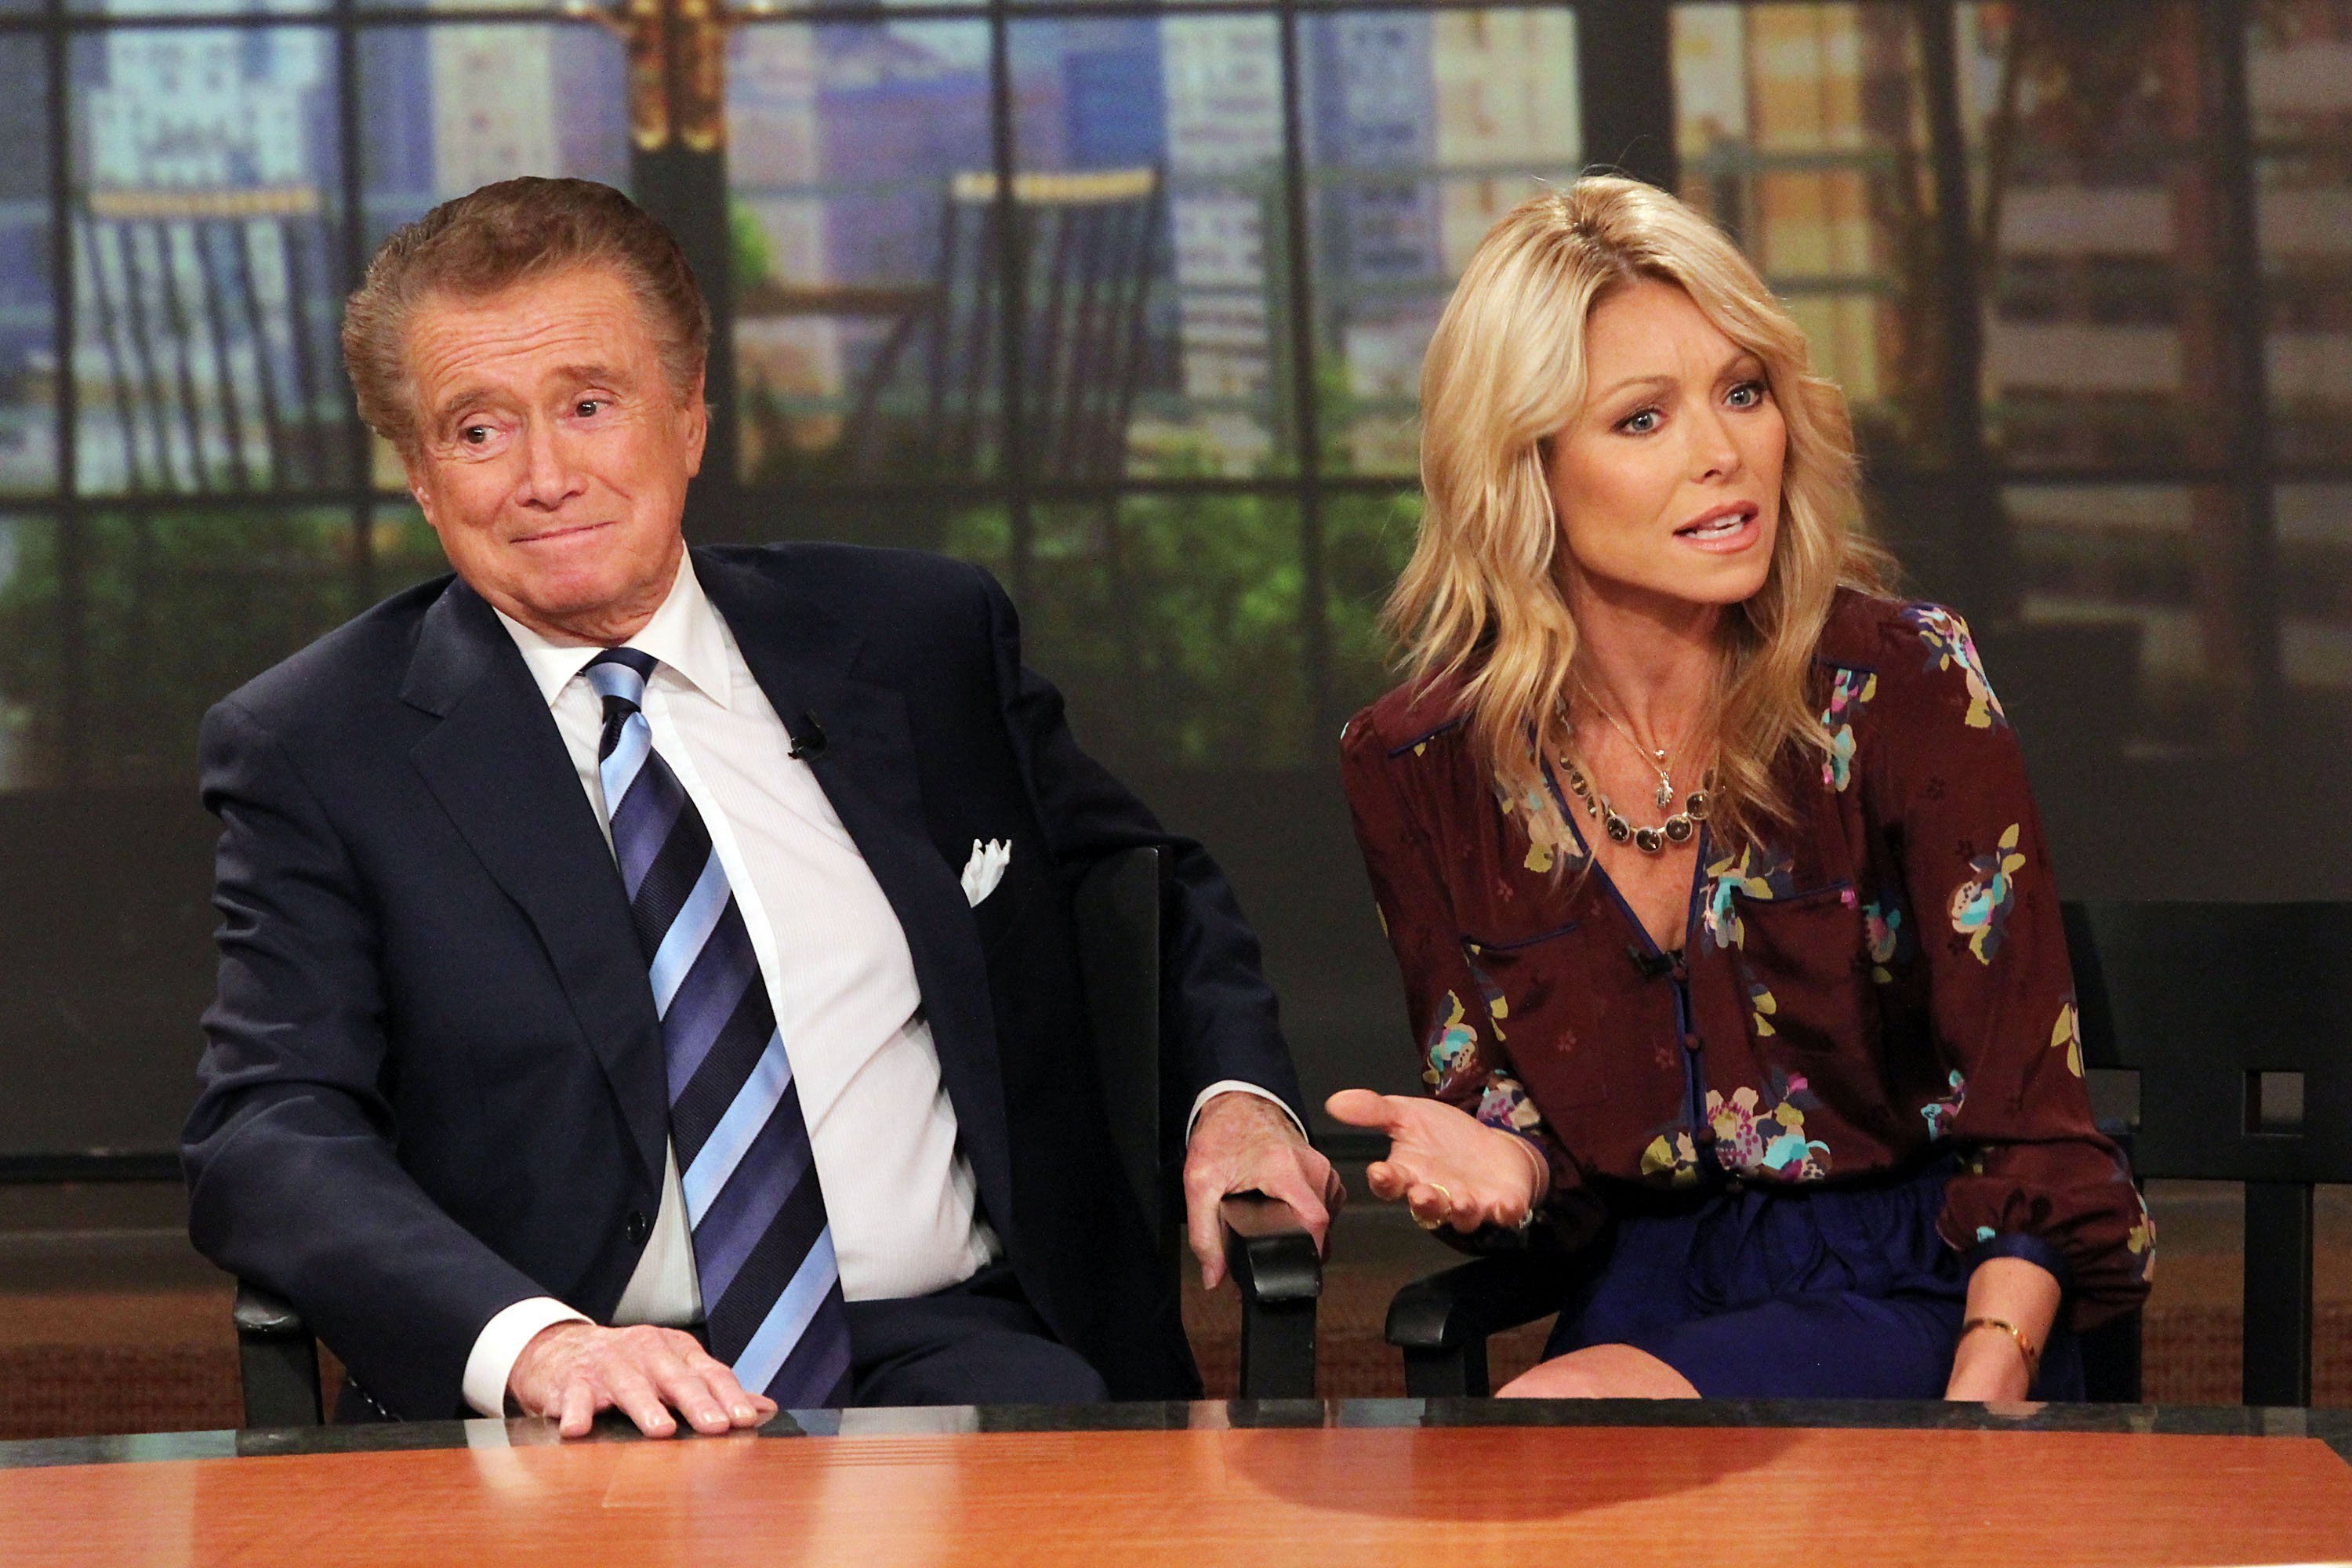 Regis Philbin and Kelly Ripa on November 17, 2011 in New York City | Source: Getty Images